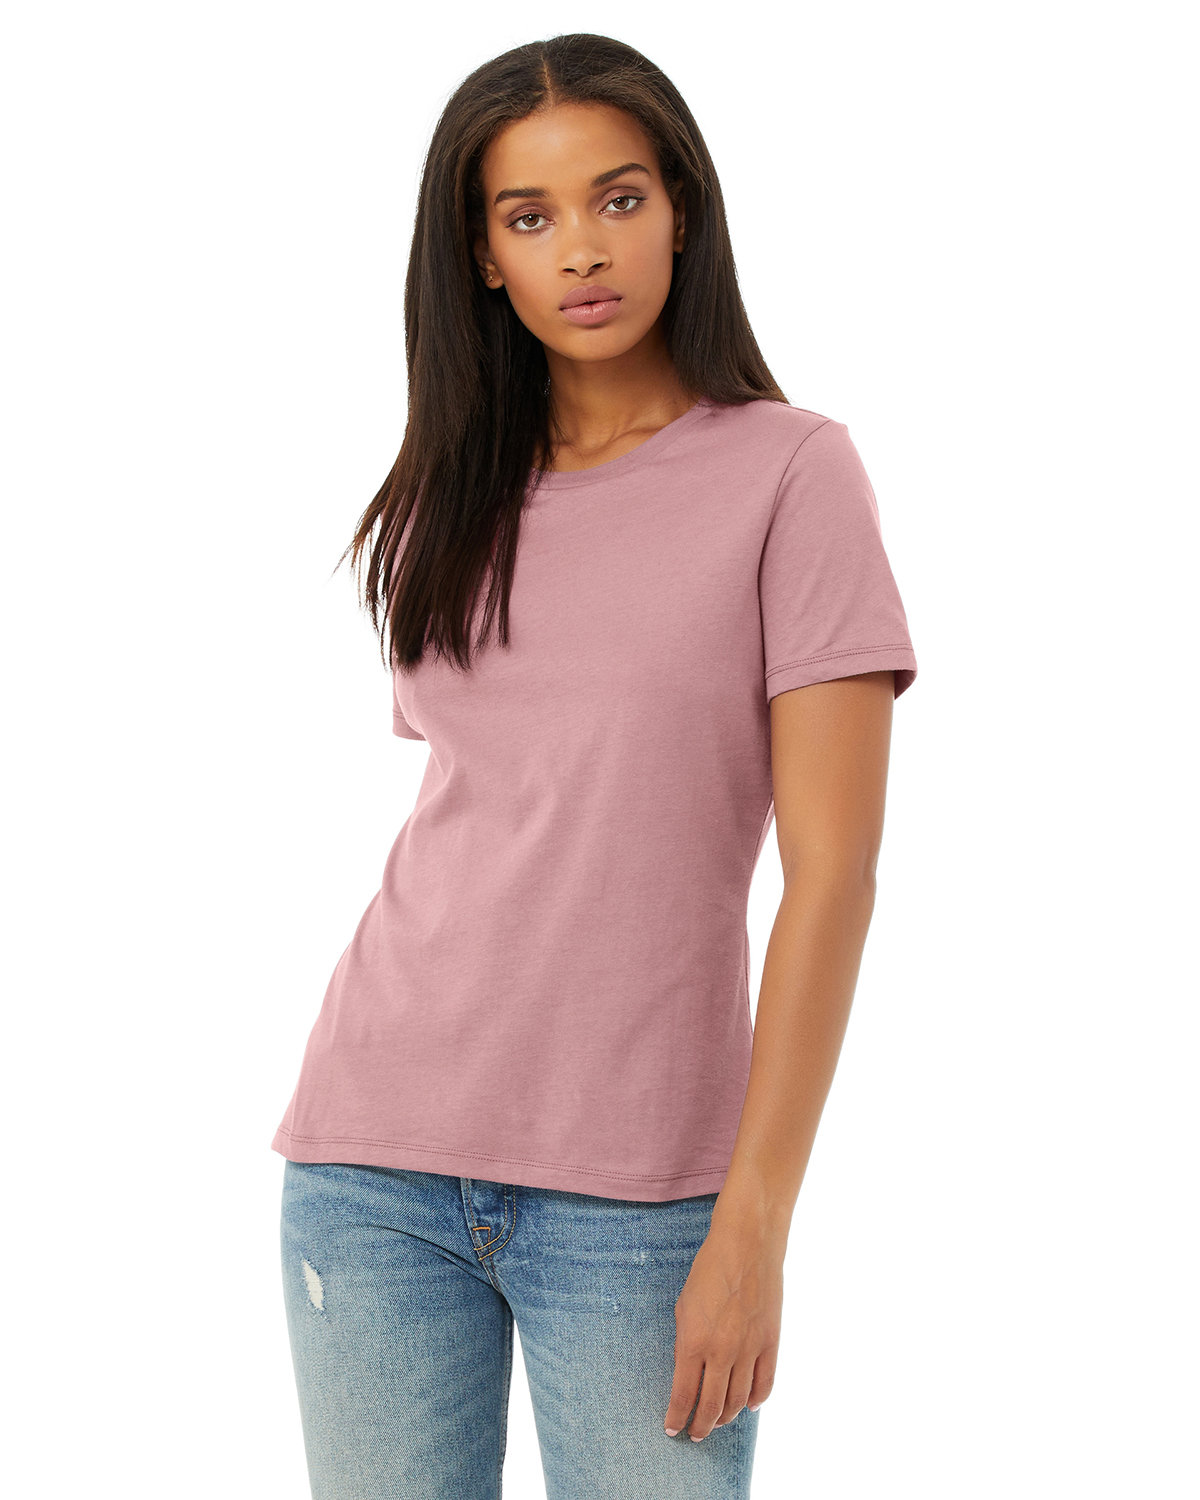 Bella + Canvas Ladies' Relaxed Jersey Short-Sleeve T-Shirt orchid 